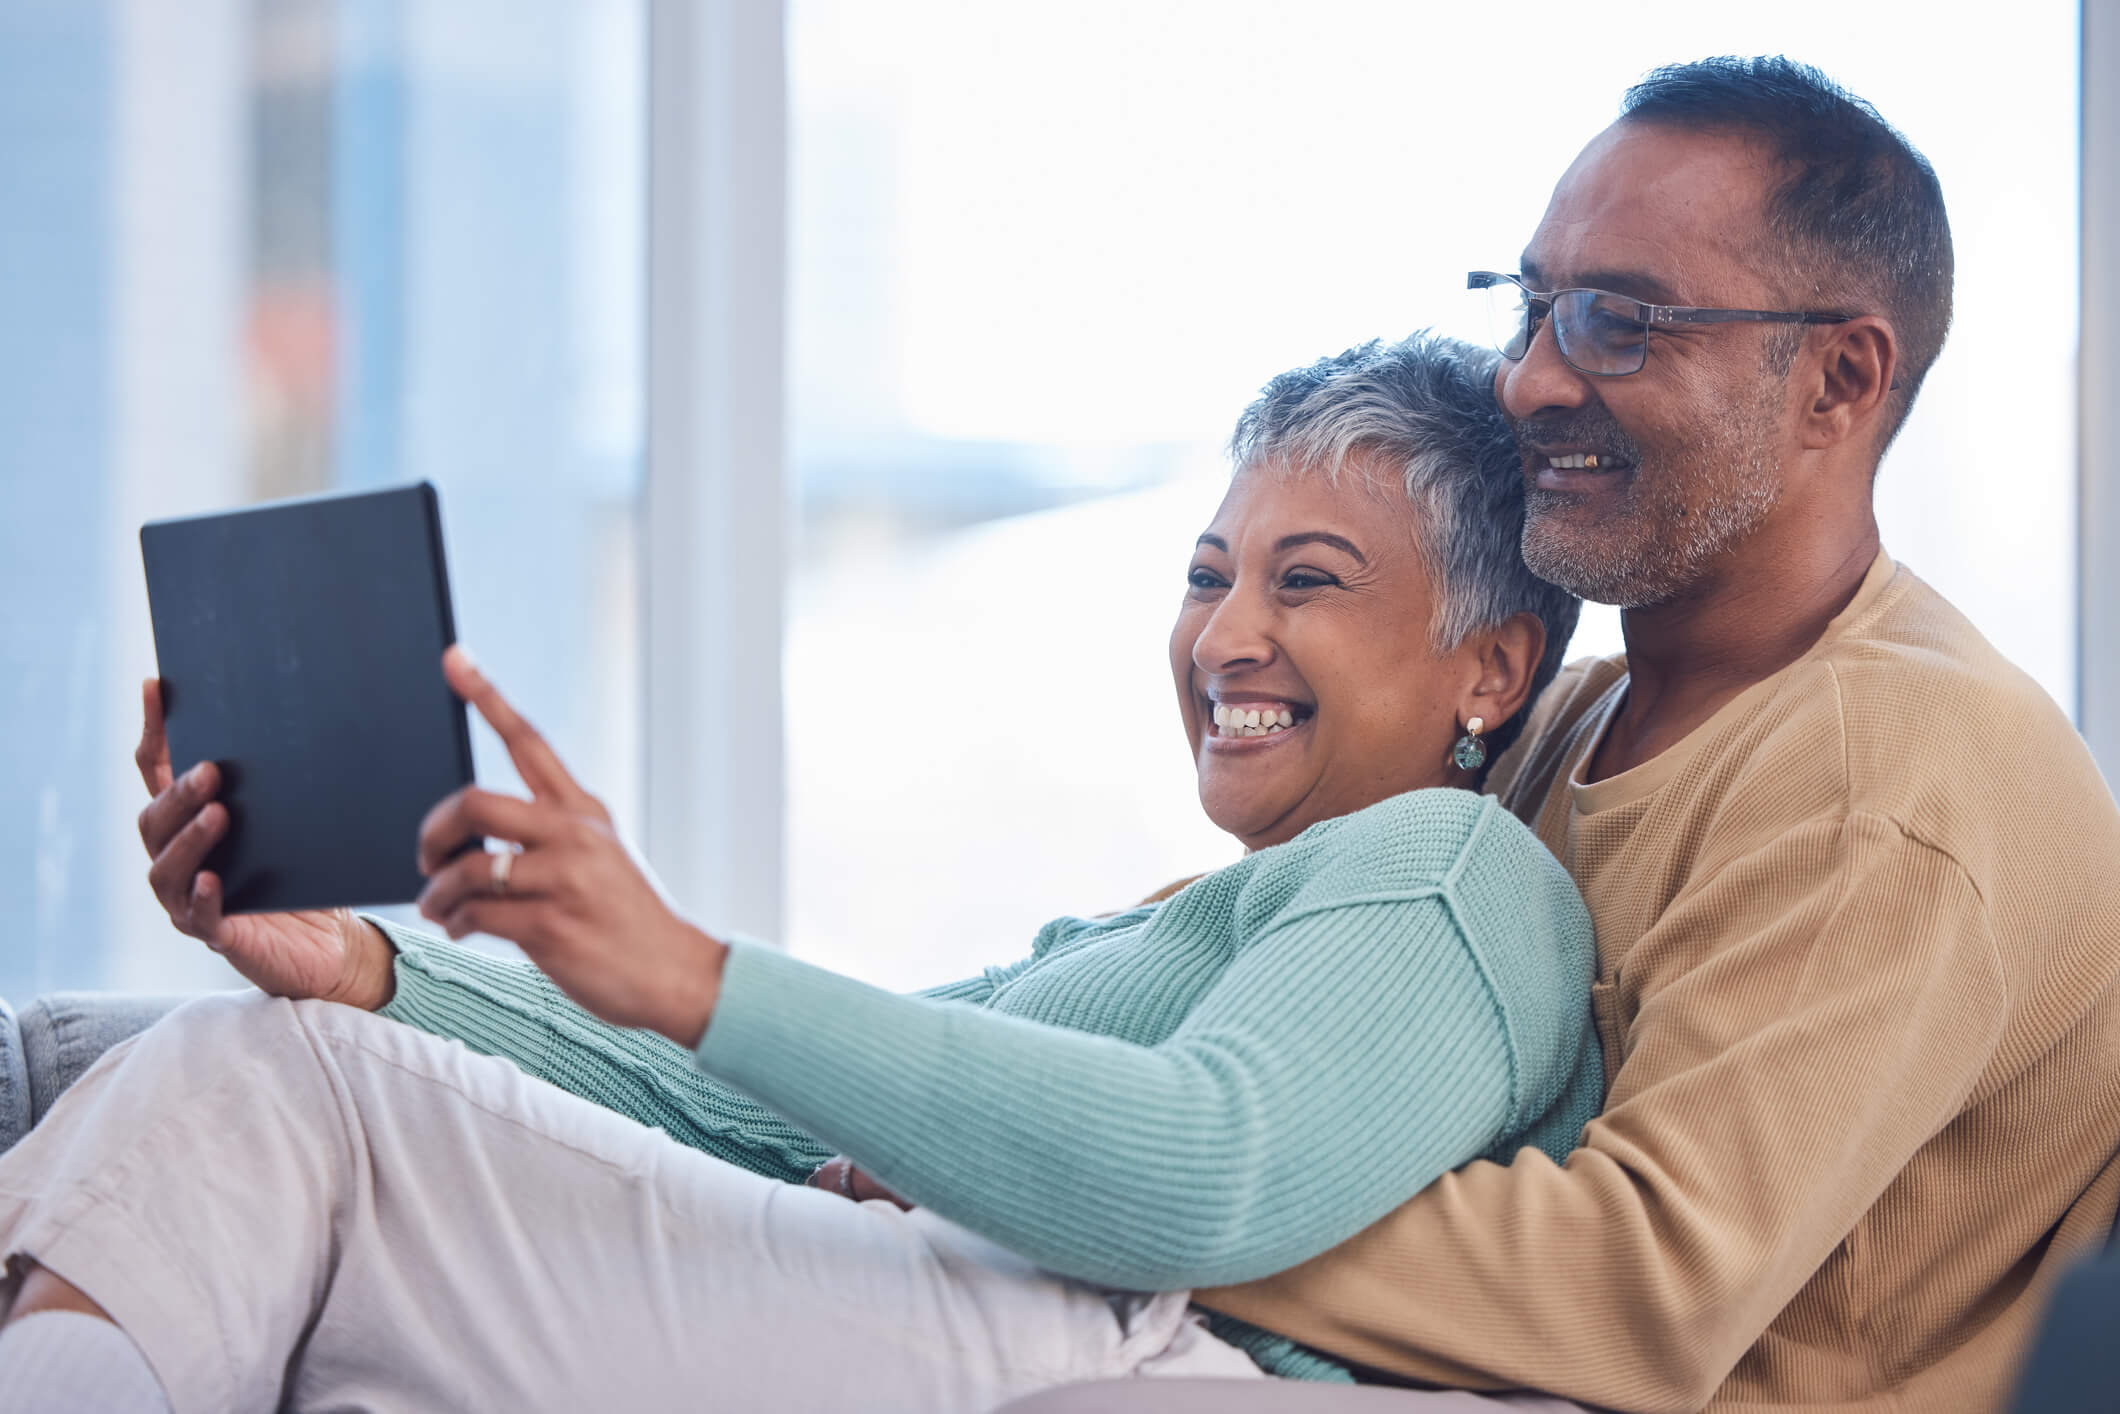 A couple are lying on a couch and looking at a tablet screen; the man is hugging the woman and the woman is holding onto the tablet, and they are both smiling.